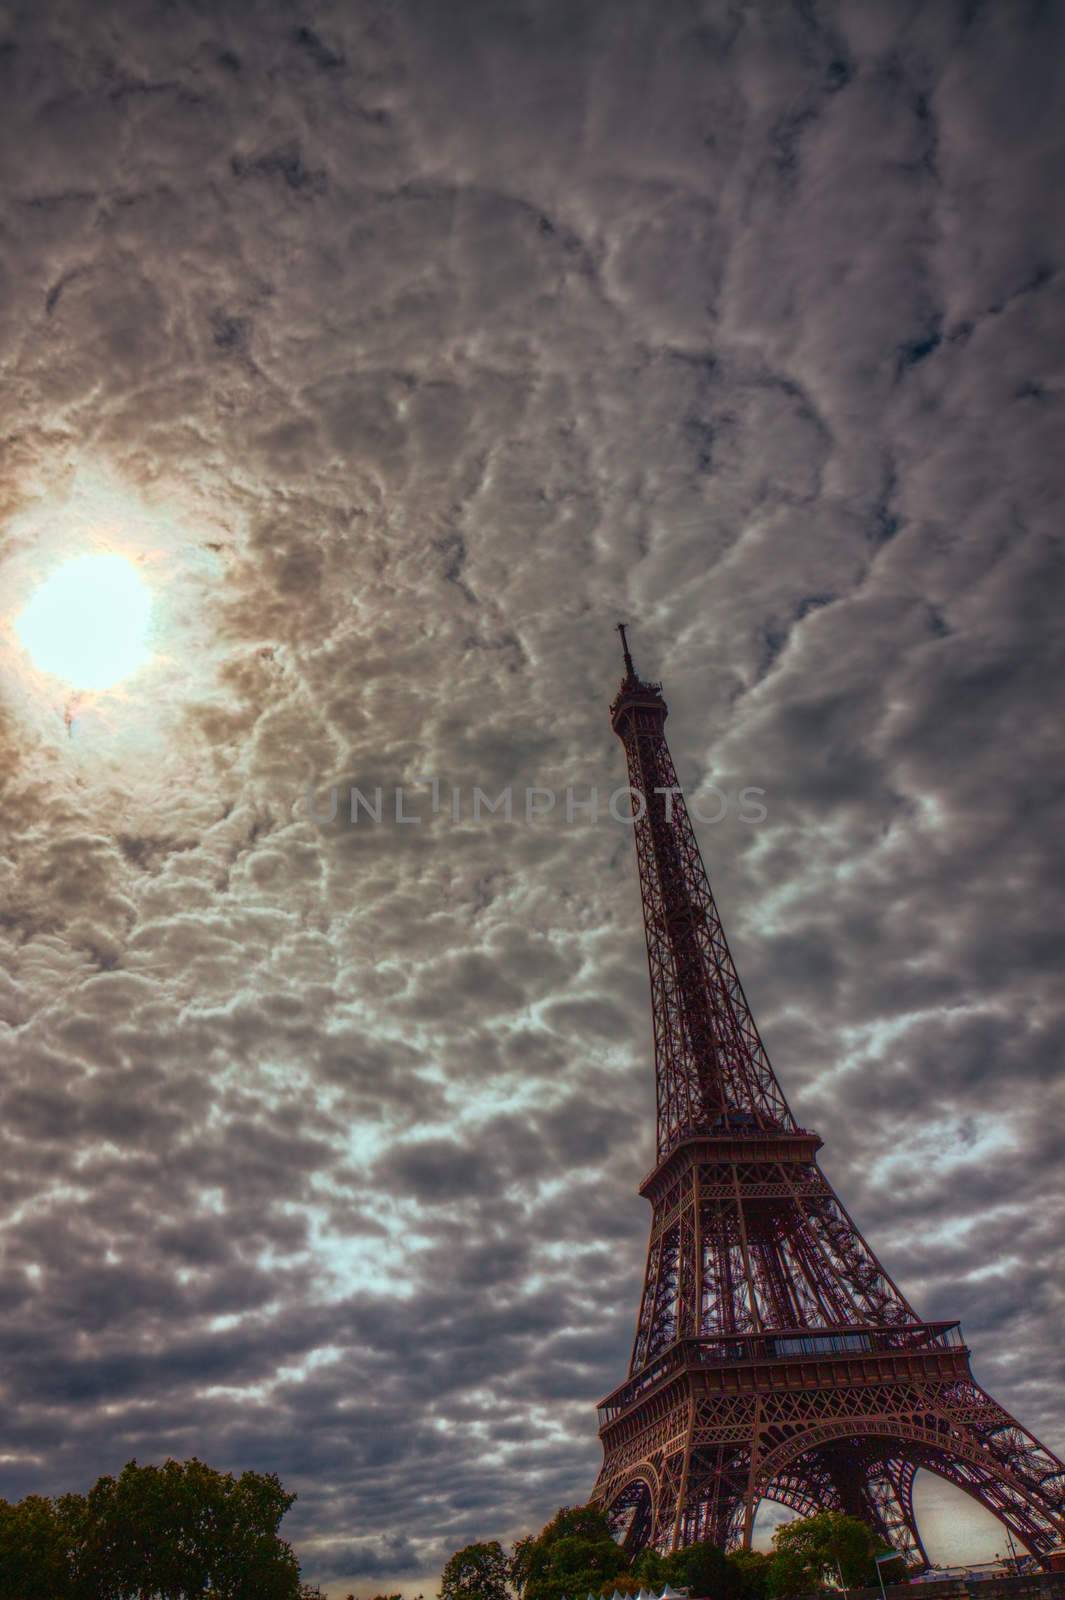 Dramatic clouds over Eiffel Tower in Paris, France